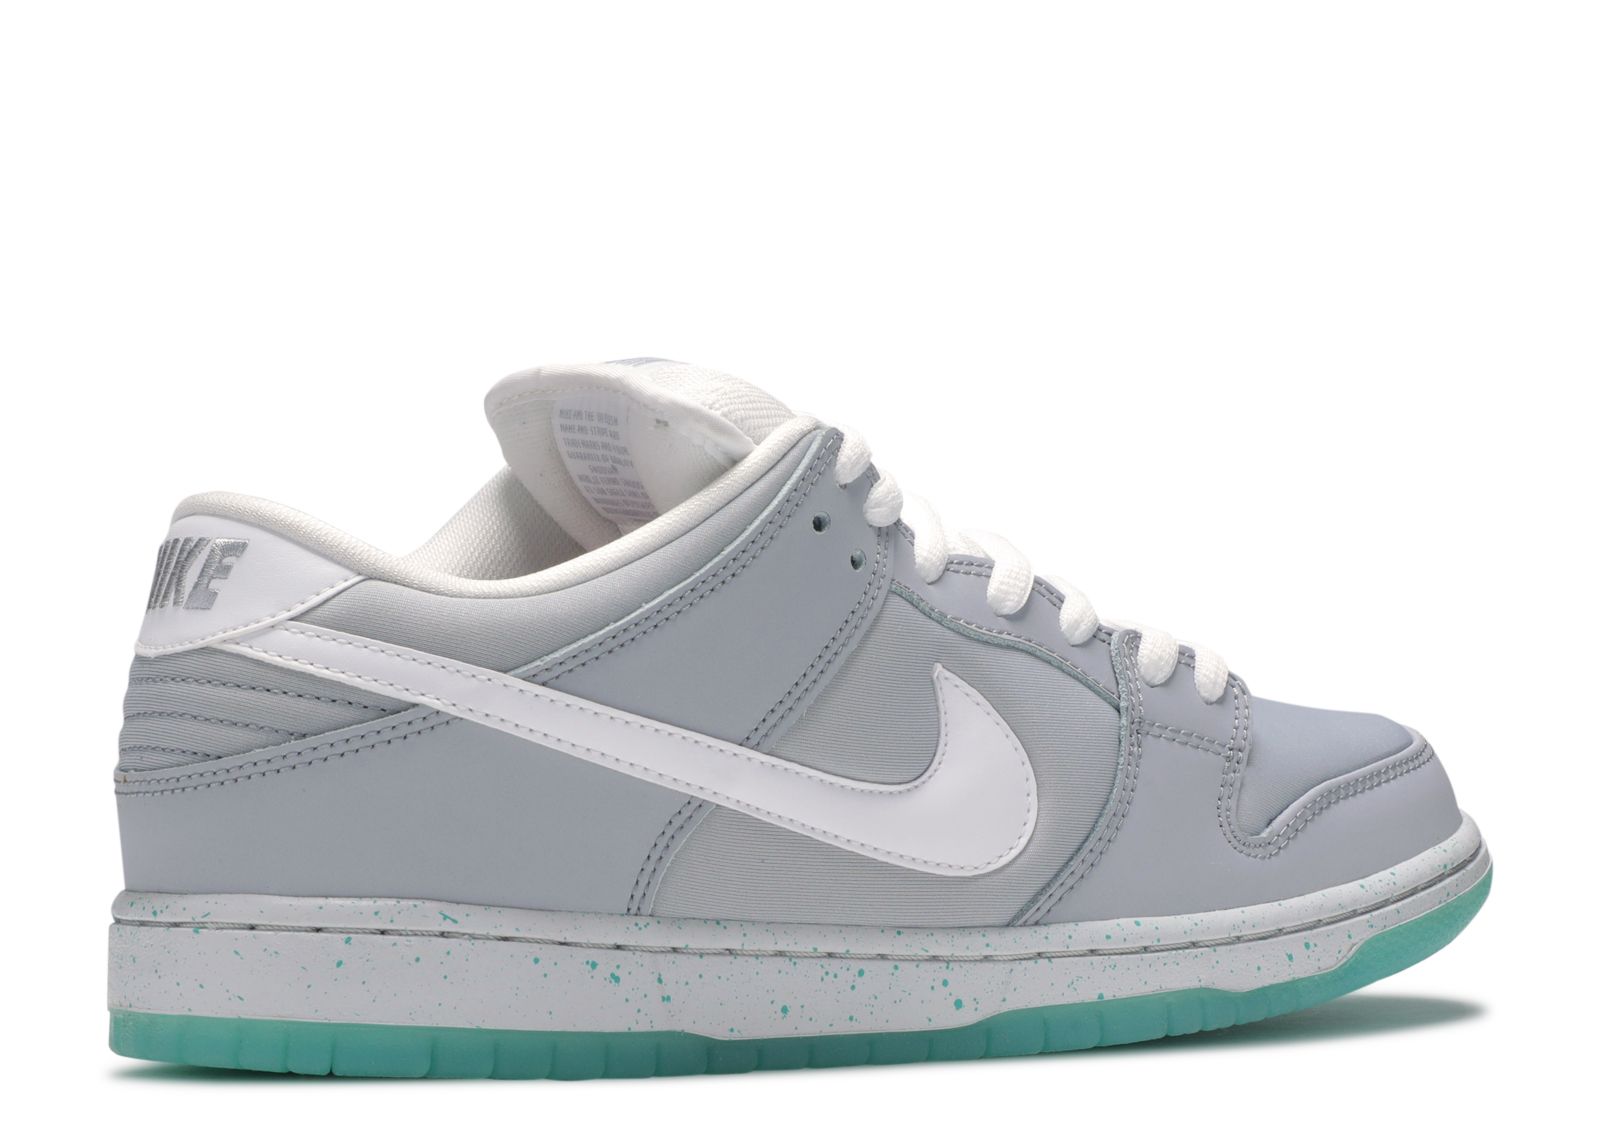 SB Dunk Low 'Marty McFly' - Nike 